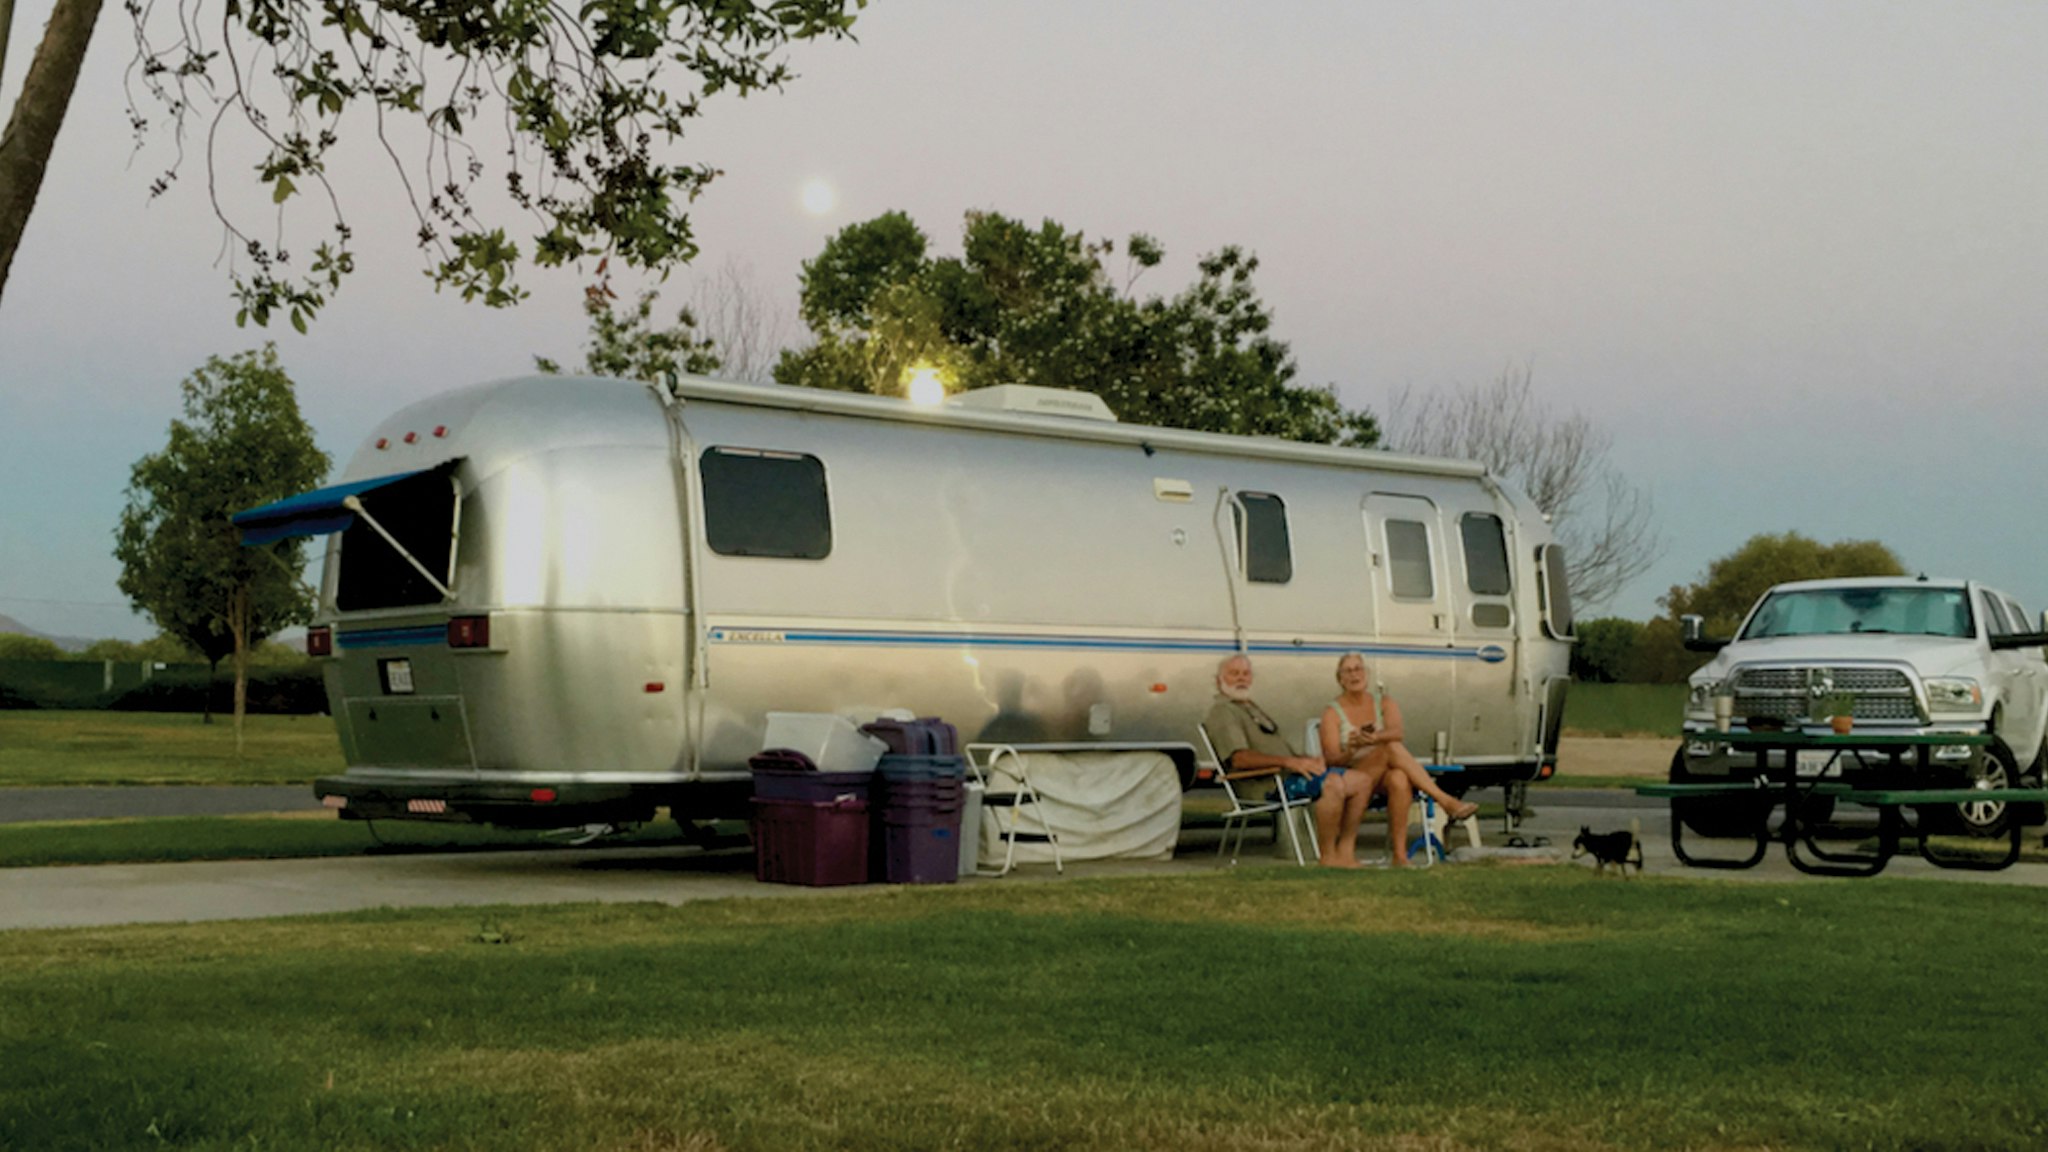 Jim and Carmen sitting outside of their Airstream Travel Trailer